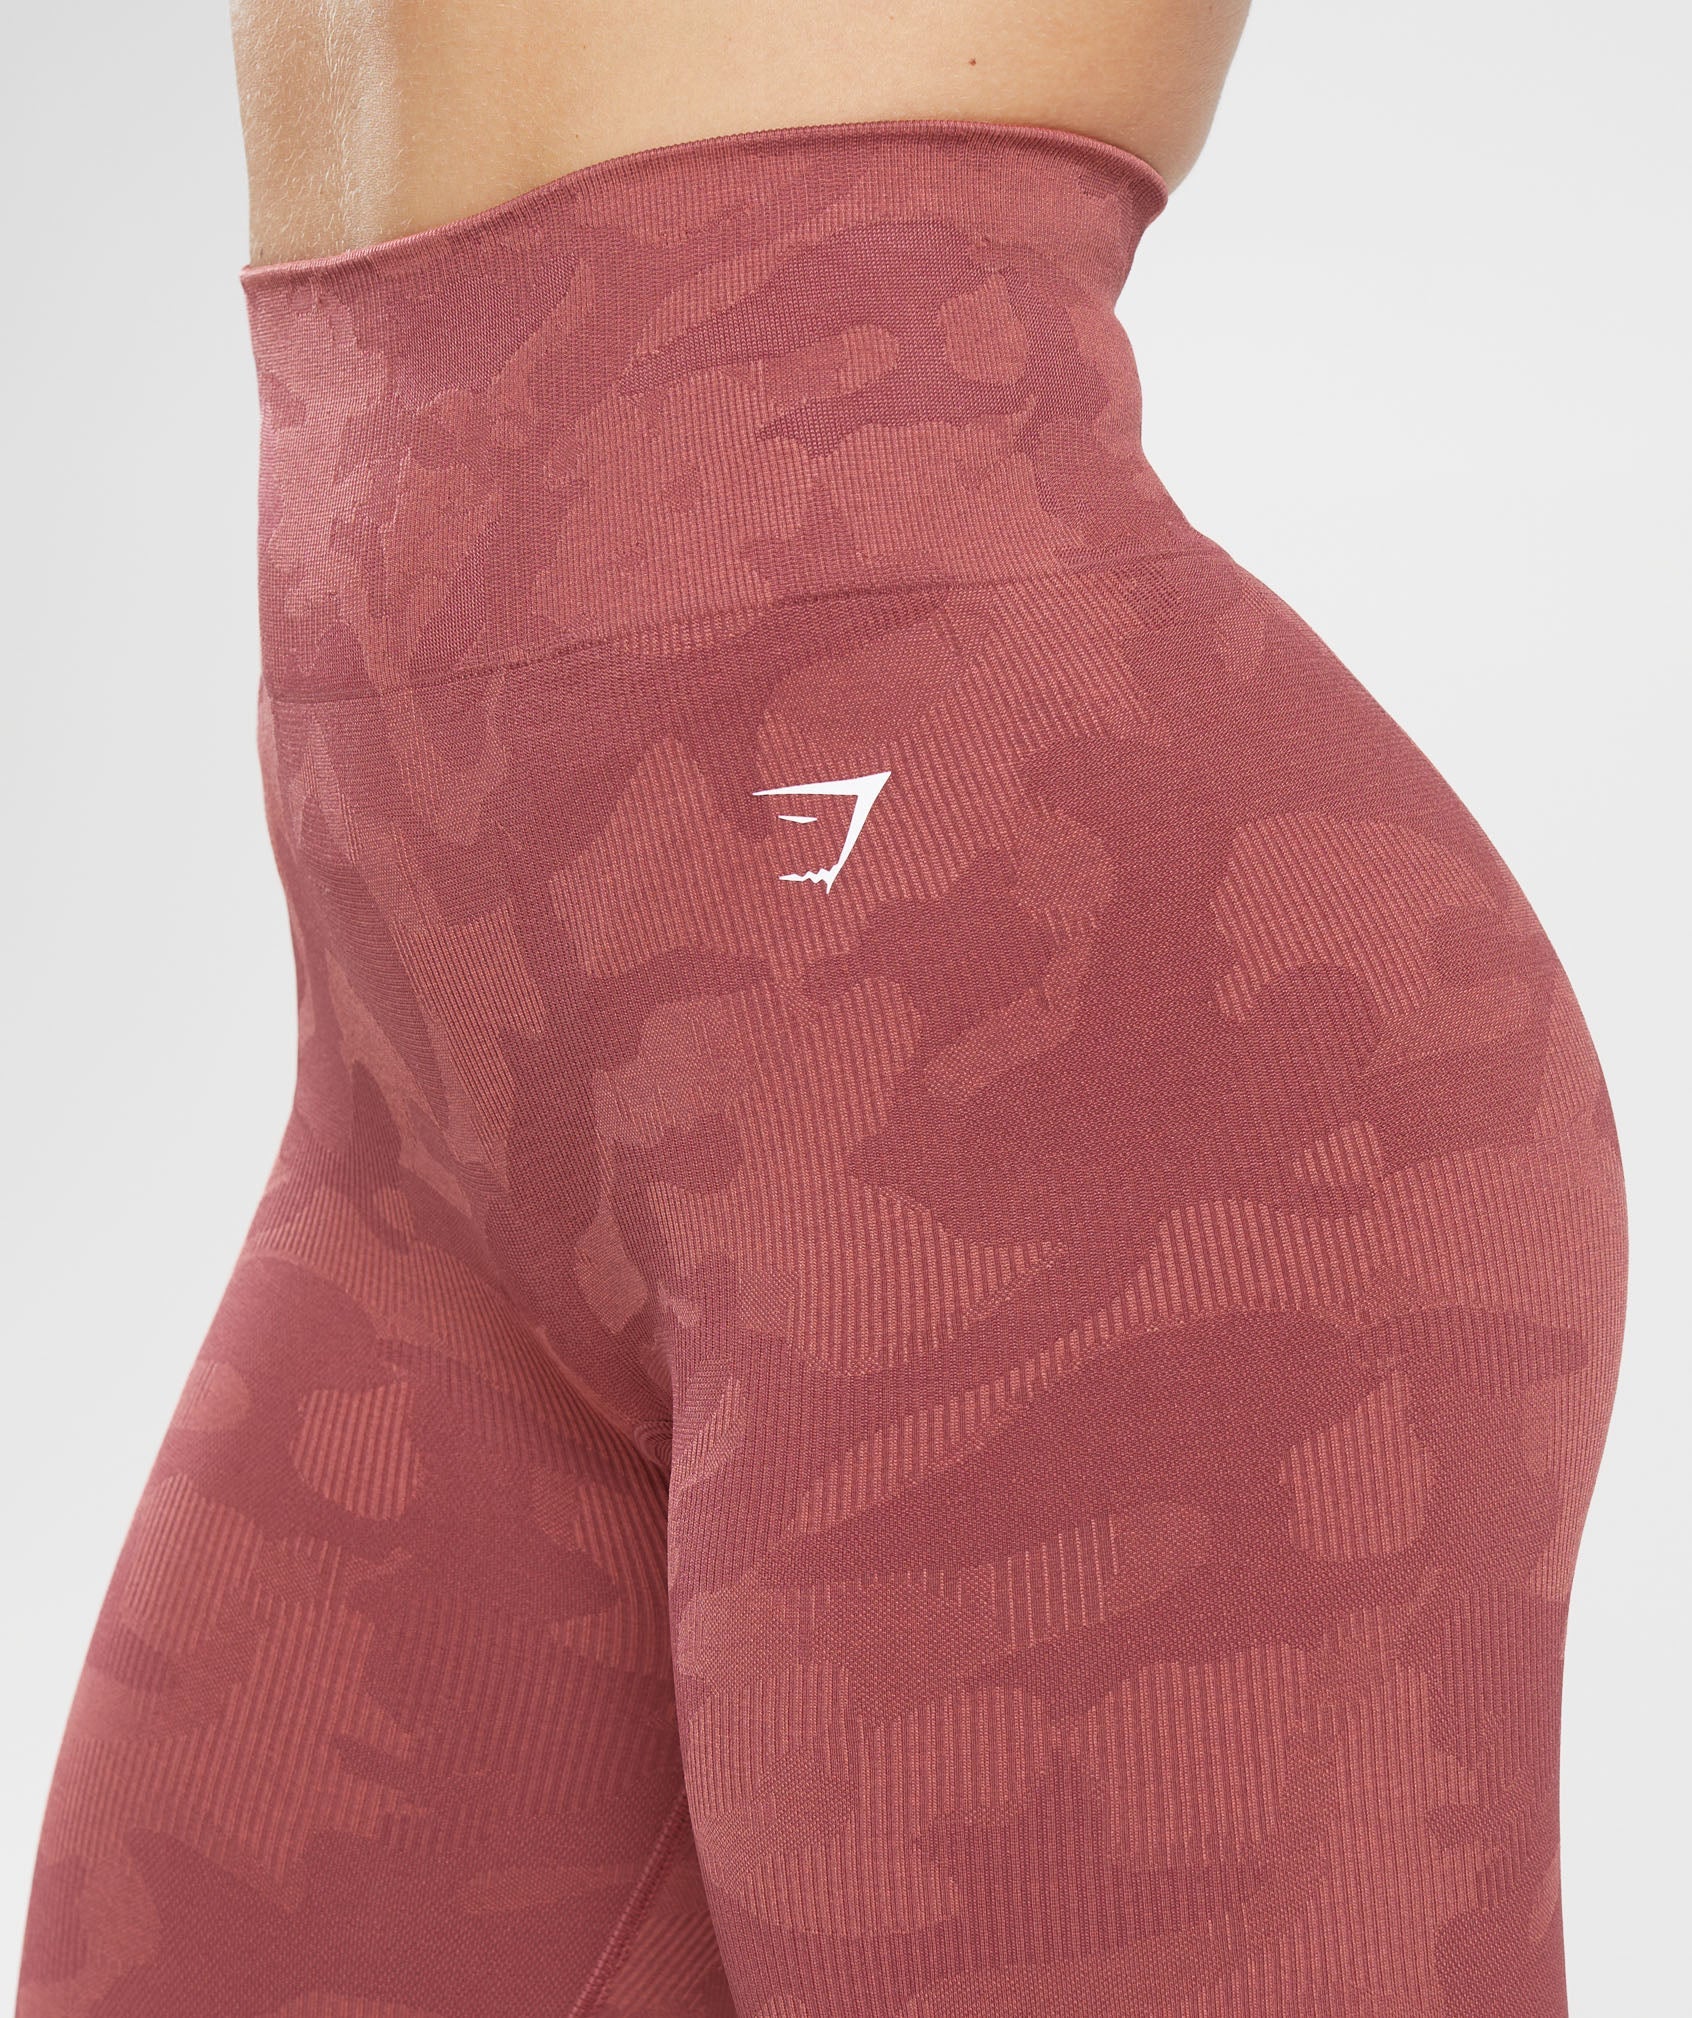 Adapt Camo Seamless Ribbed Leggings in Soft Berry/Sunbaked Pink - view 5